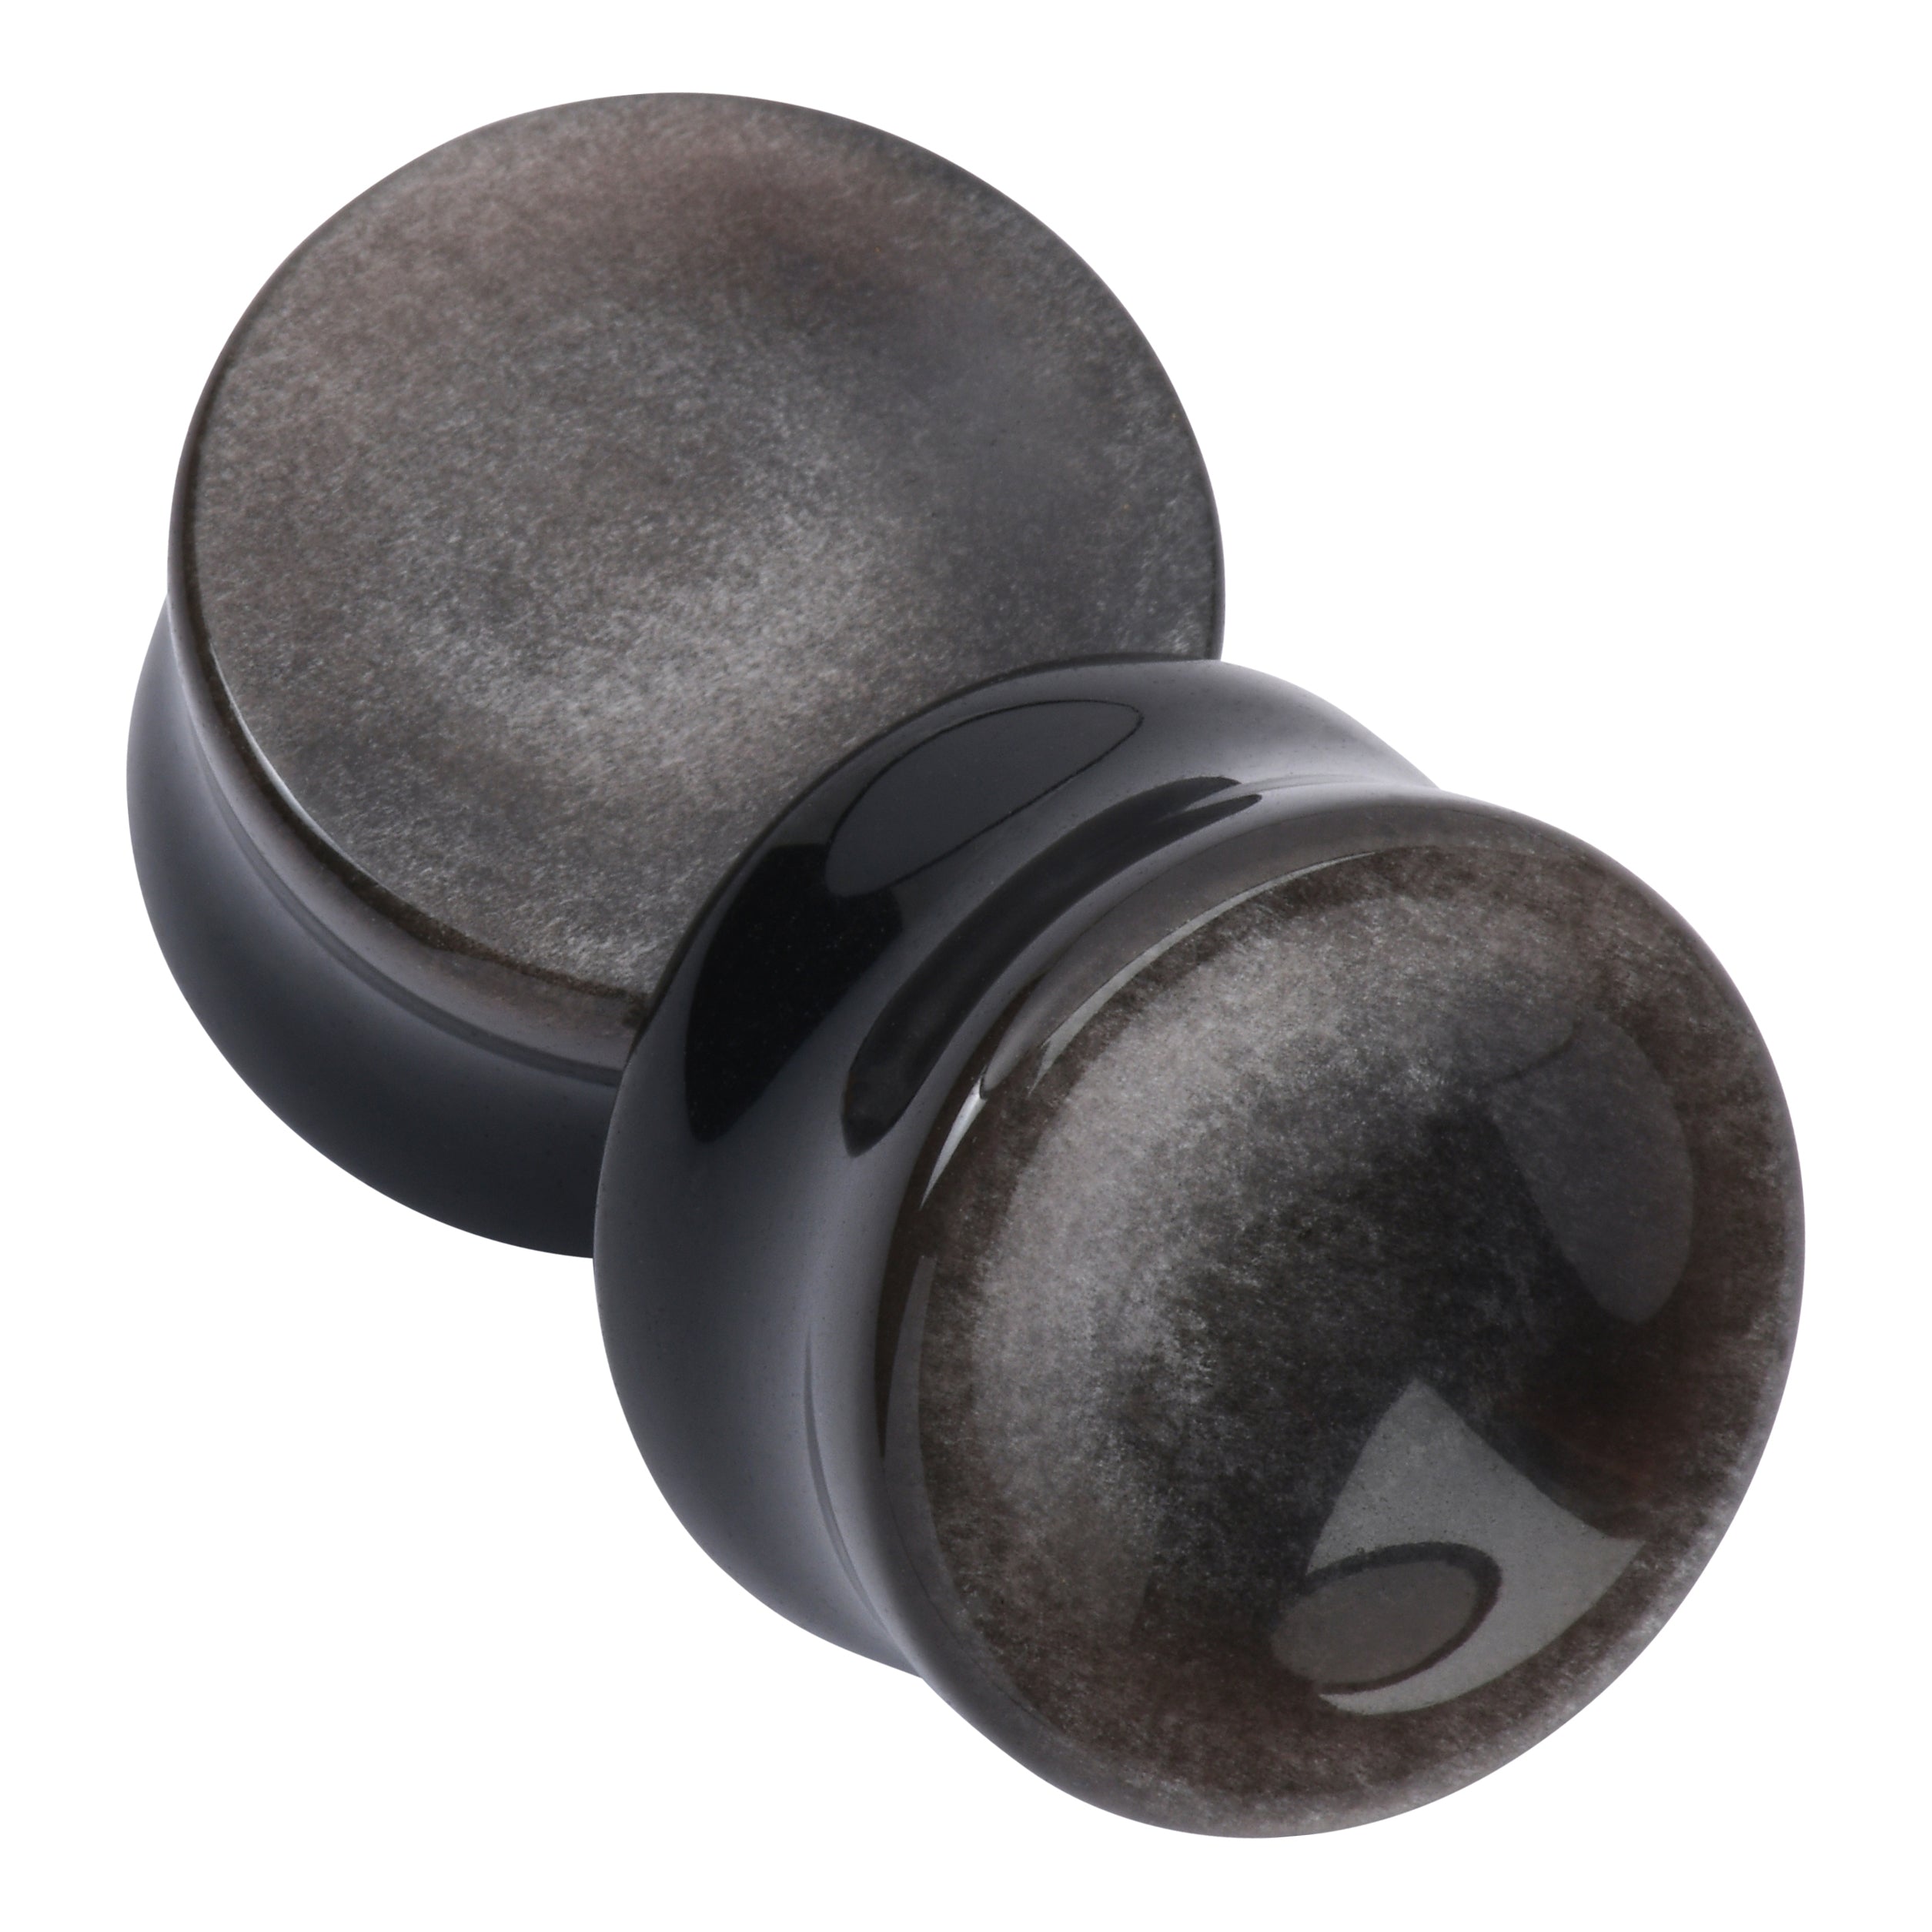 Silver Obsidian Concave Plugs Plugs 0 gauge (8mm) Silver Obsidian